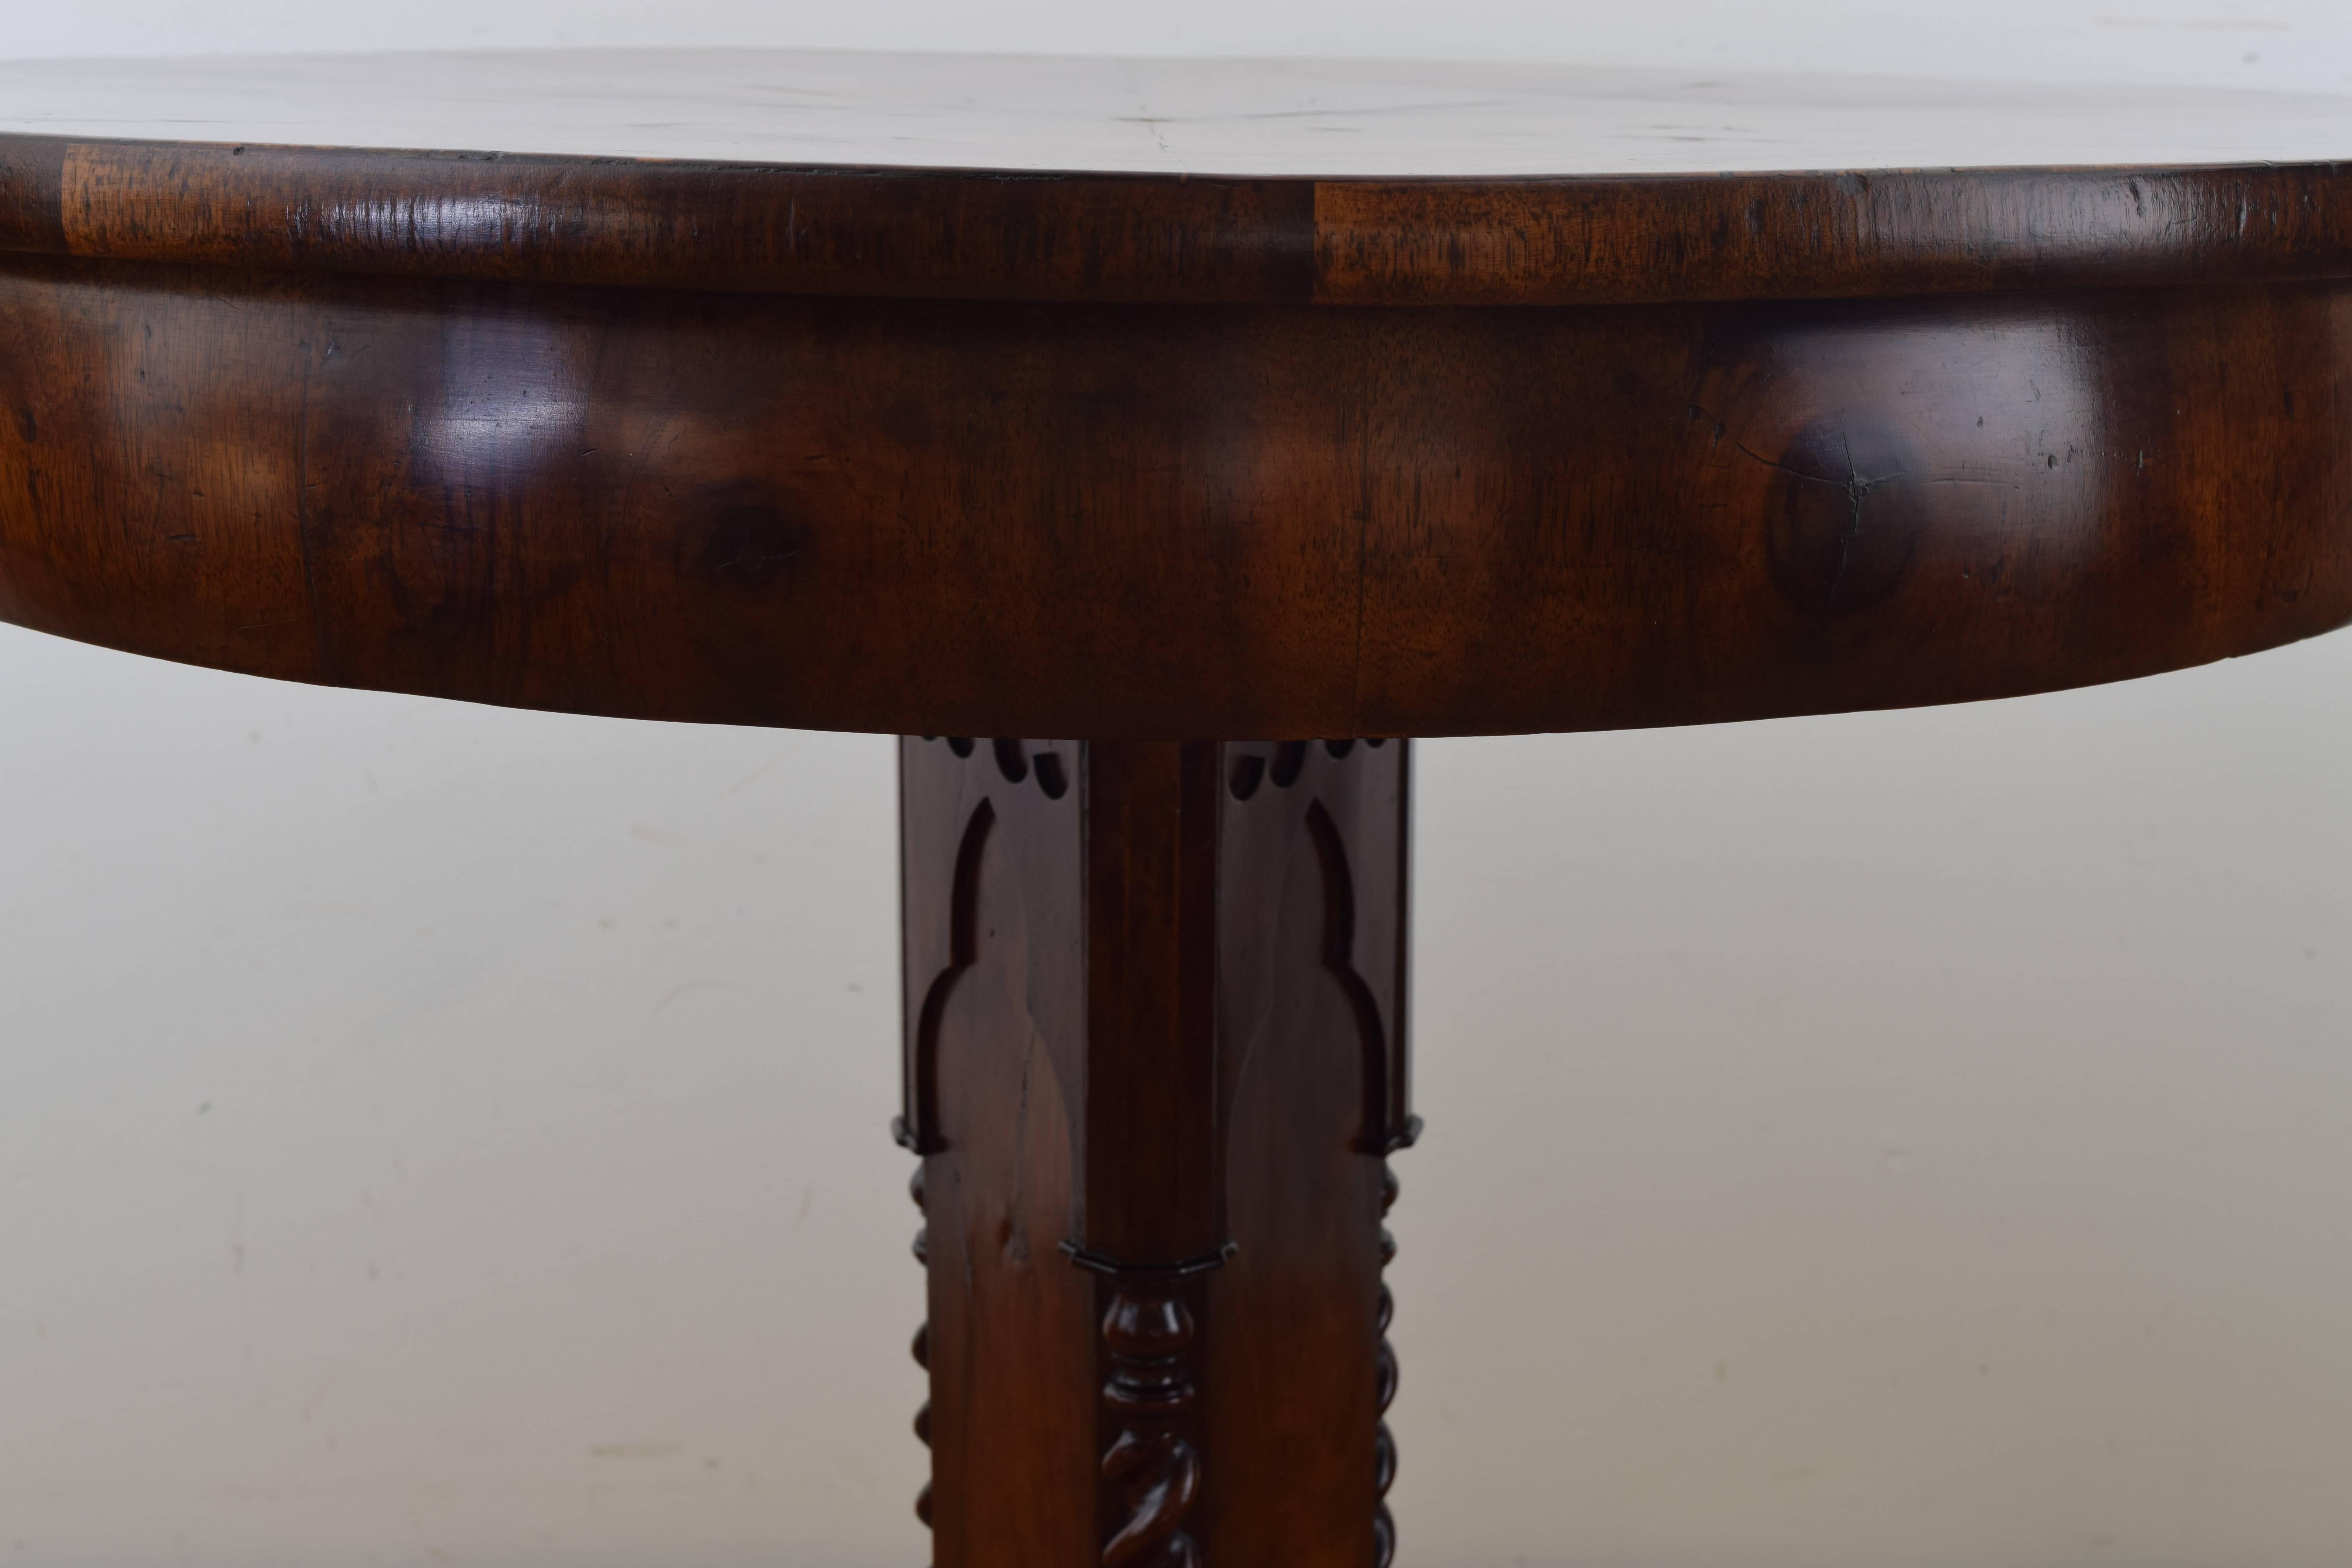 Italian Gothic Revival Carved Mahogany and Inlaid Center Table, Mid-19th Century 1